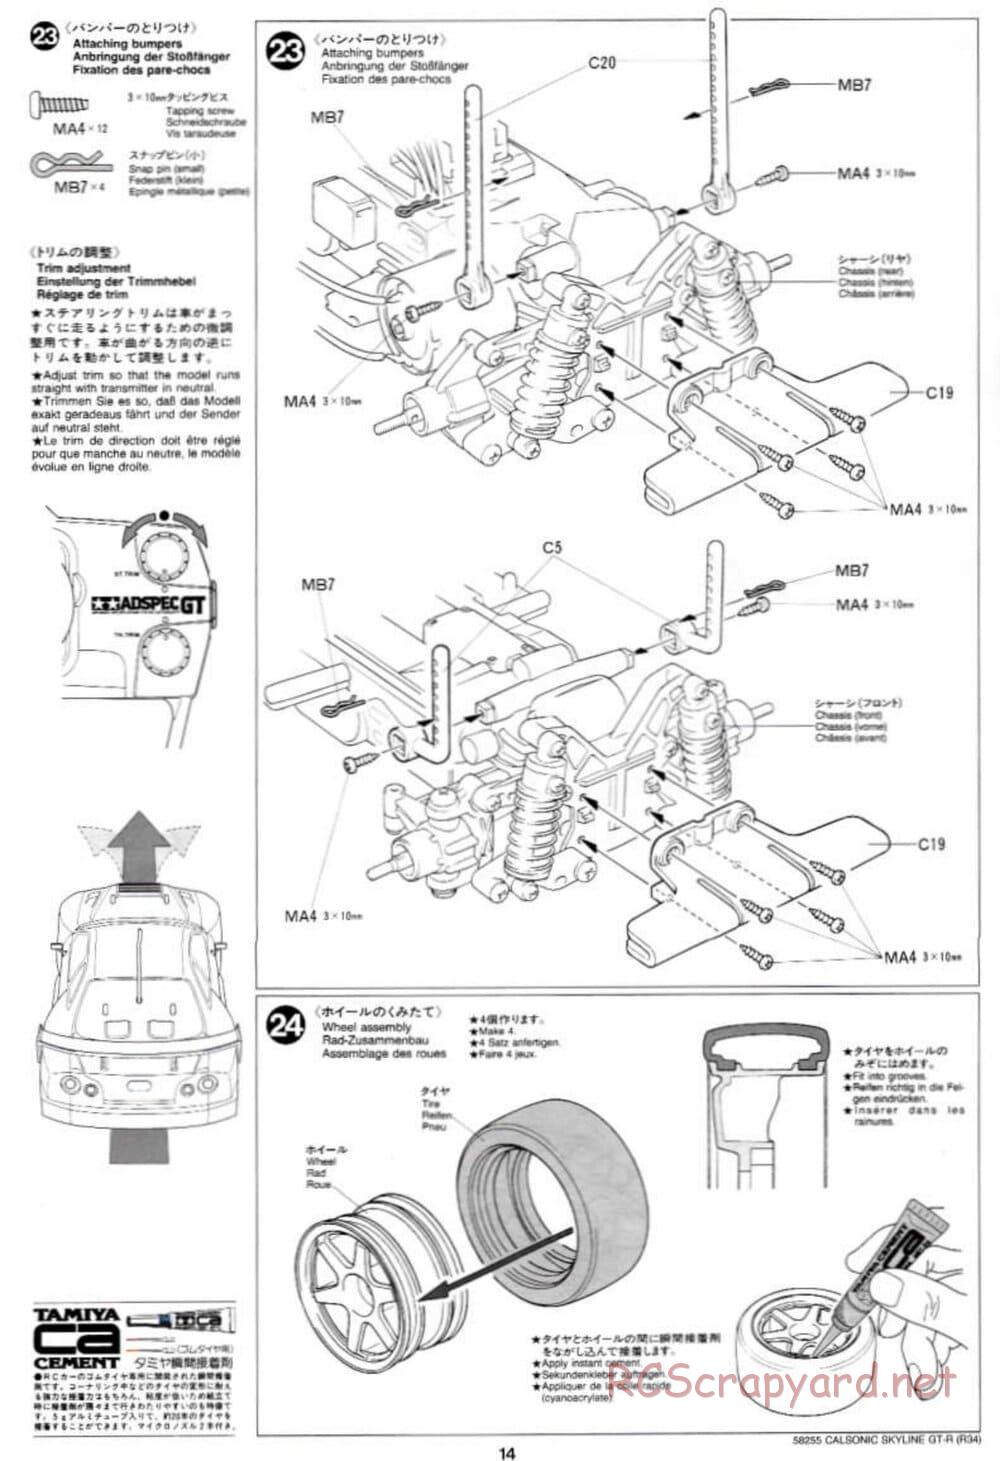 Tamiya - Calsonic Skyline GT-R (R34) - TL-01 Chassis - Manual - Page 14